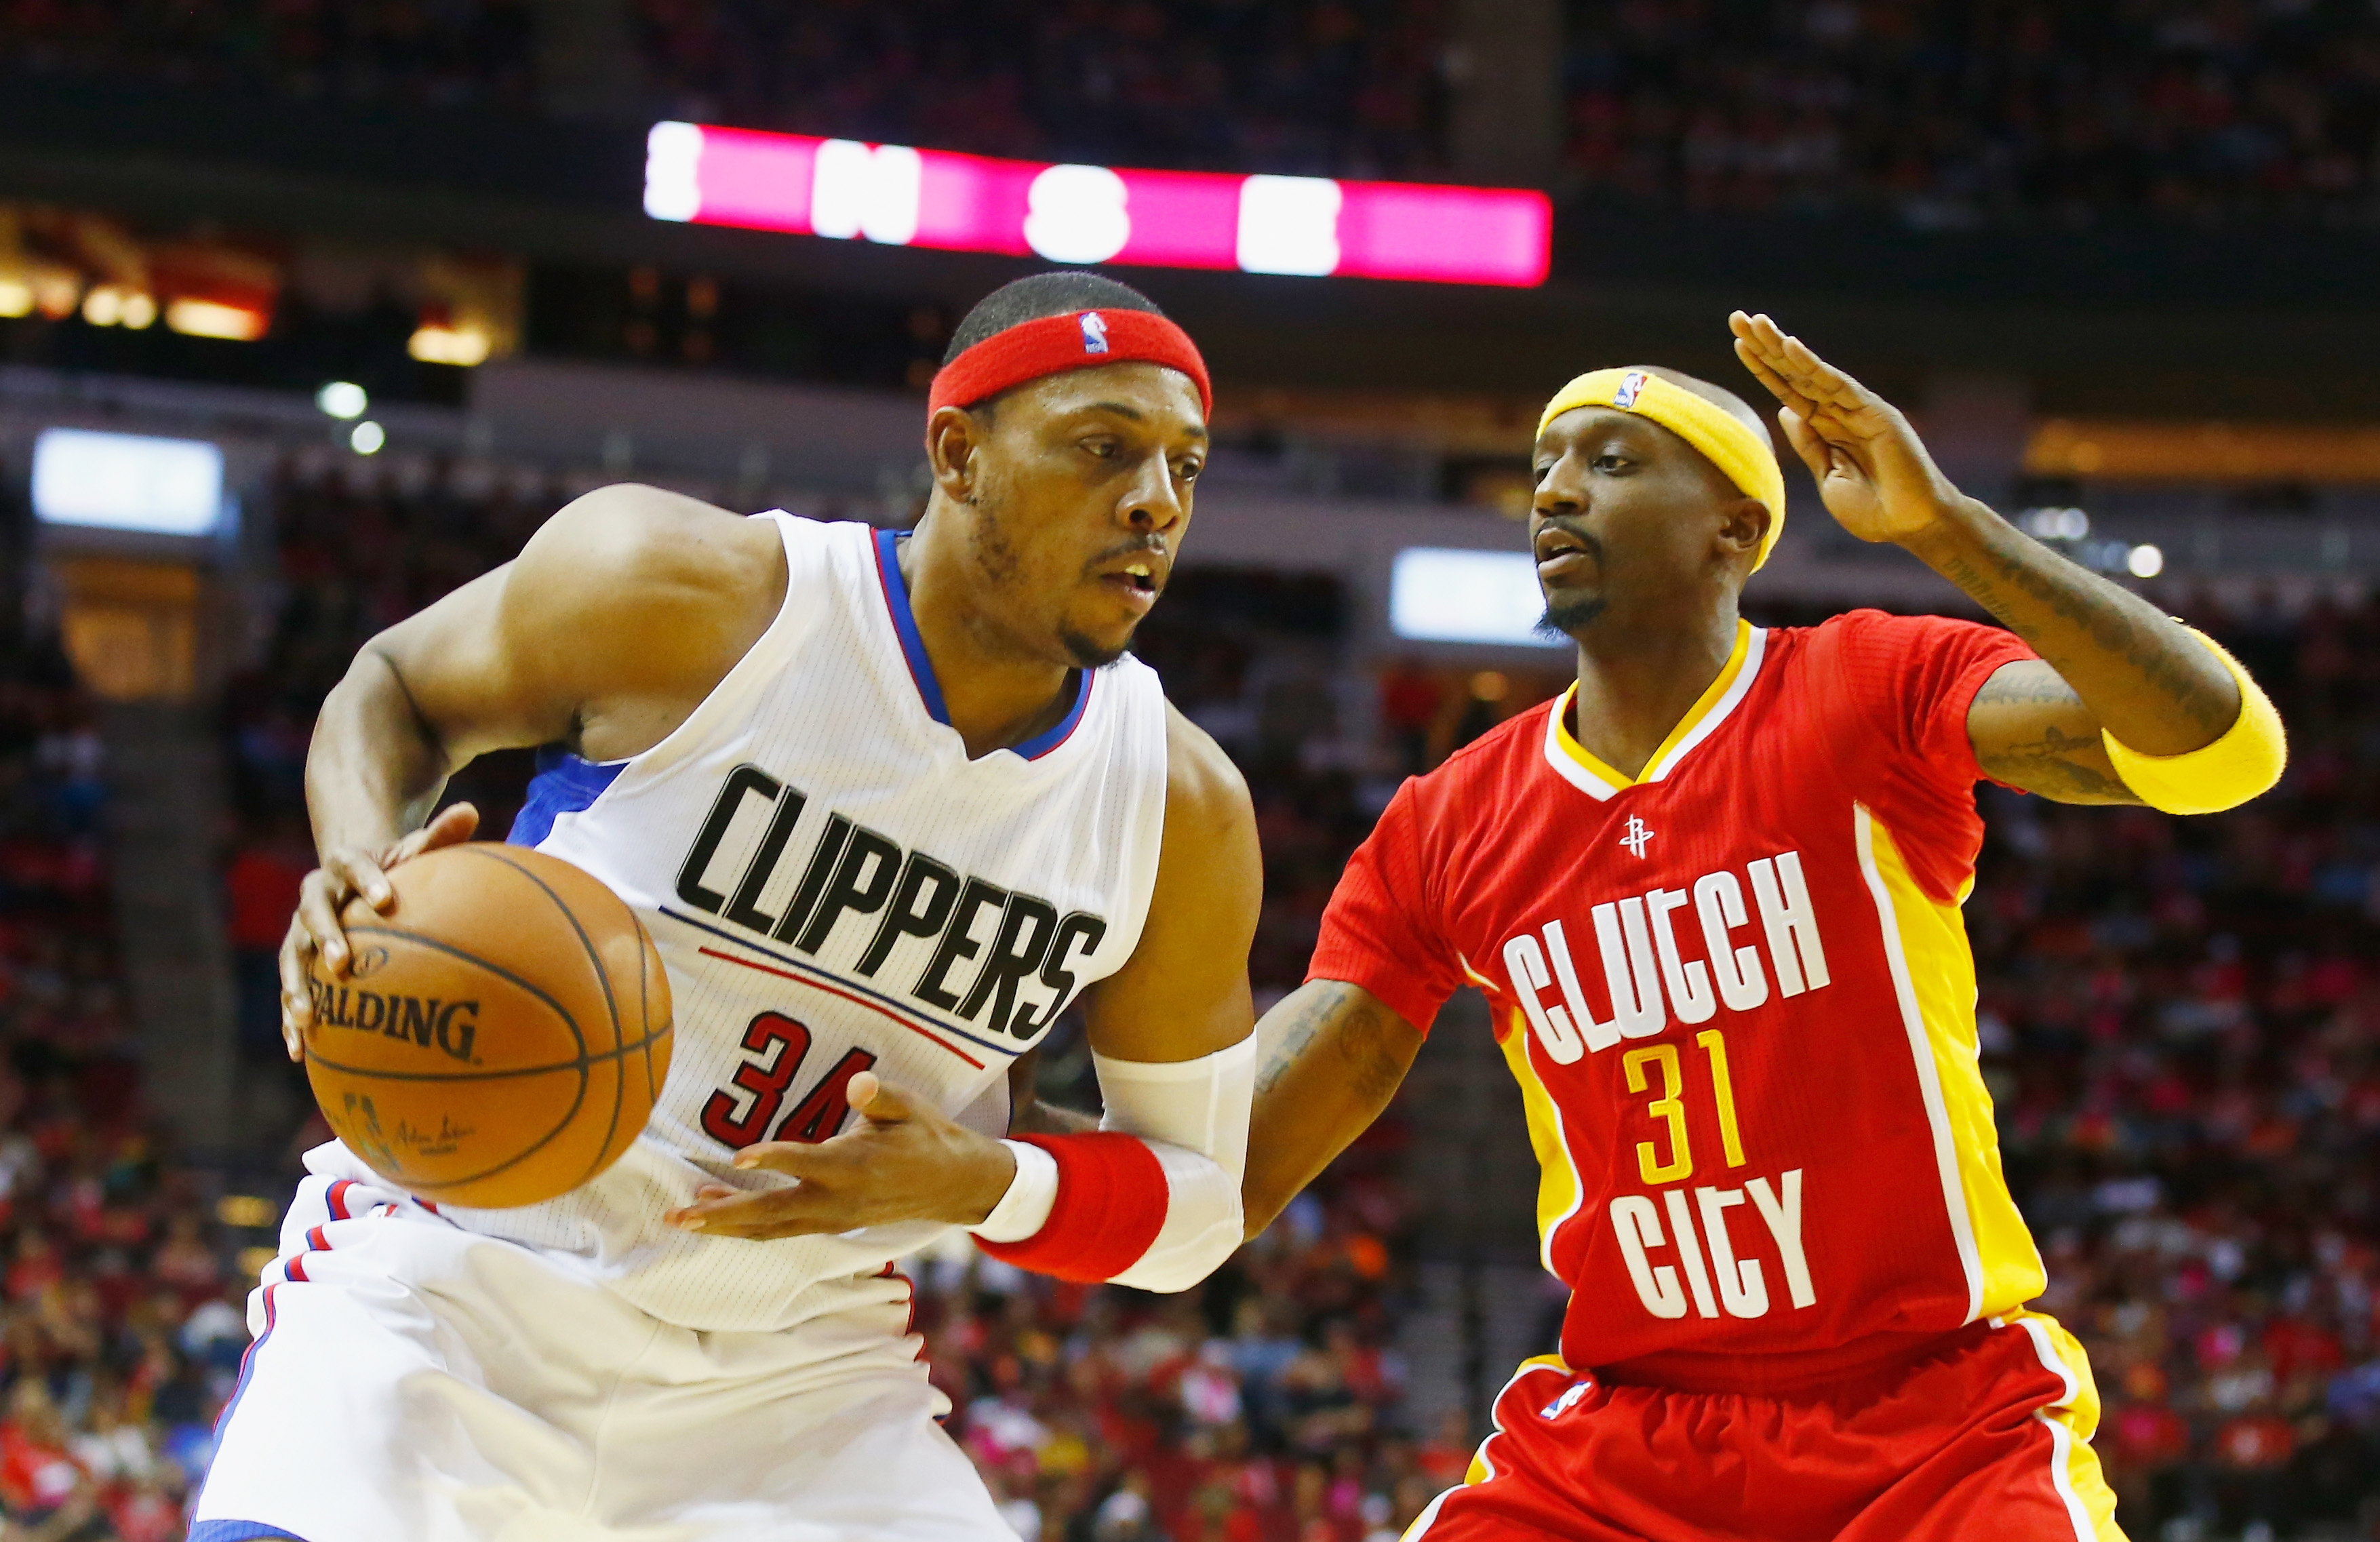 HOUSTON, TX - MARCH 16: Paul Pierce #34 of the Los Angeles Clippers works with the basketball in front of Jason Terry #31 of the Houston Rockets during their game at the Toyota Center on March 16, 2016 in Houston, Texas. NOTE TO USER: User expressly acknowledges and agrees that, by downloading and or using this Photograph, user is consenting to the terms and conditions of the Getty Images License Agreement.   Scott Halleran/Getty Images/AFP